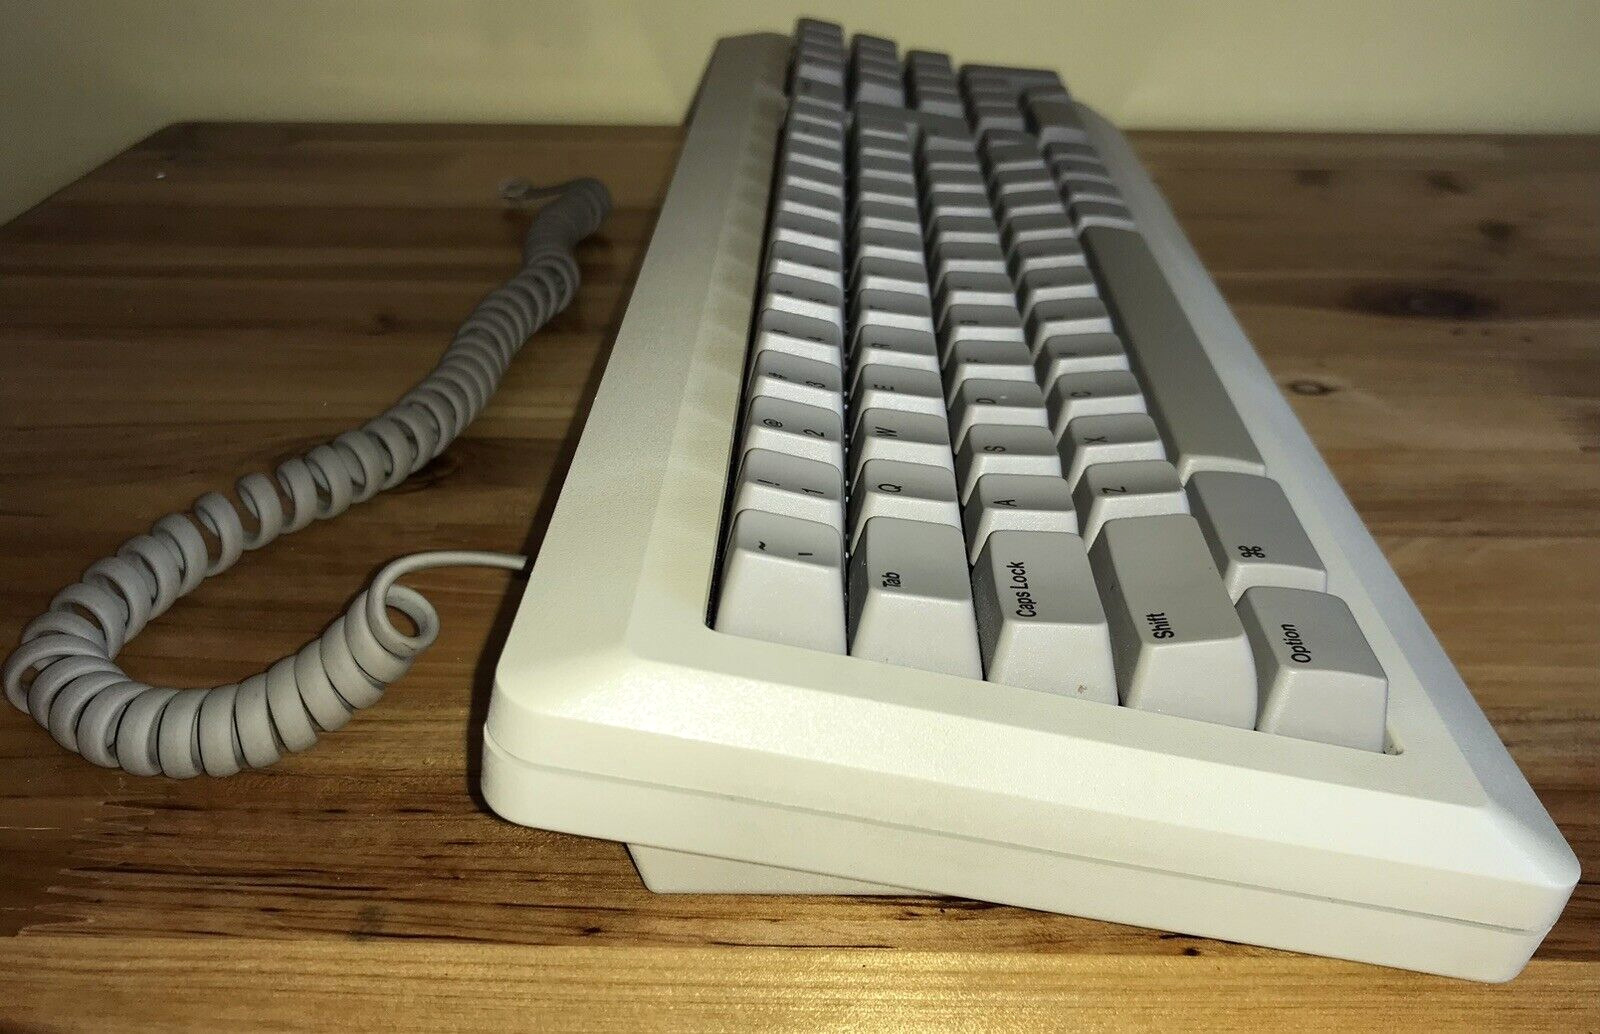 RARE 1986 Apple Macintosh Plus KEYBOARD Model M0110A Beige w/Cable TESTED NICE